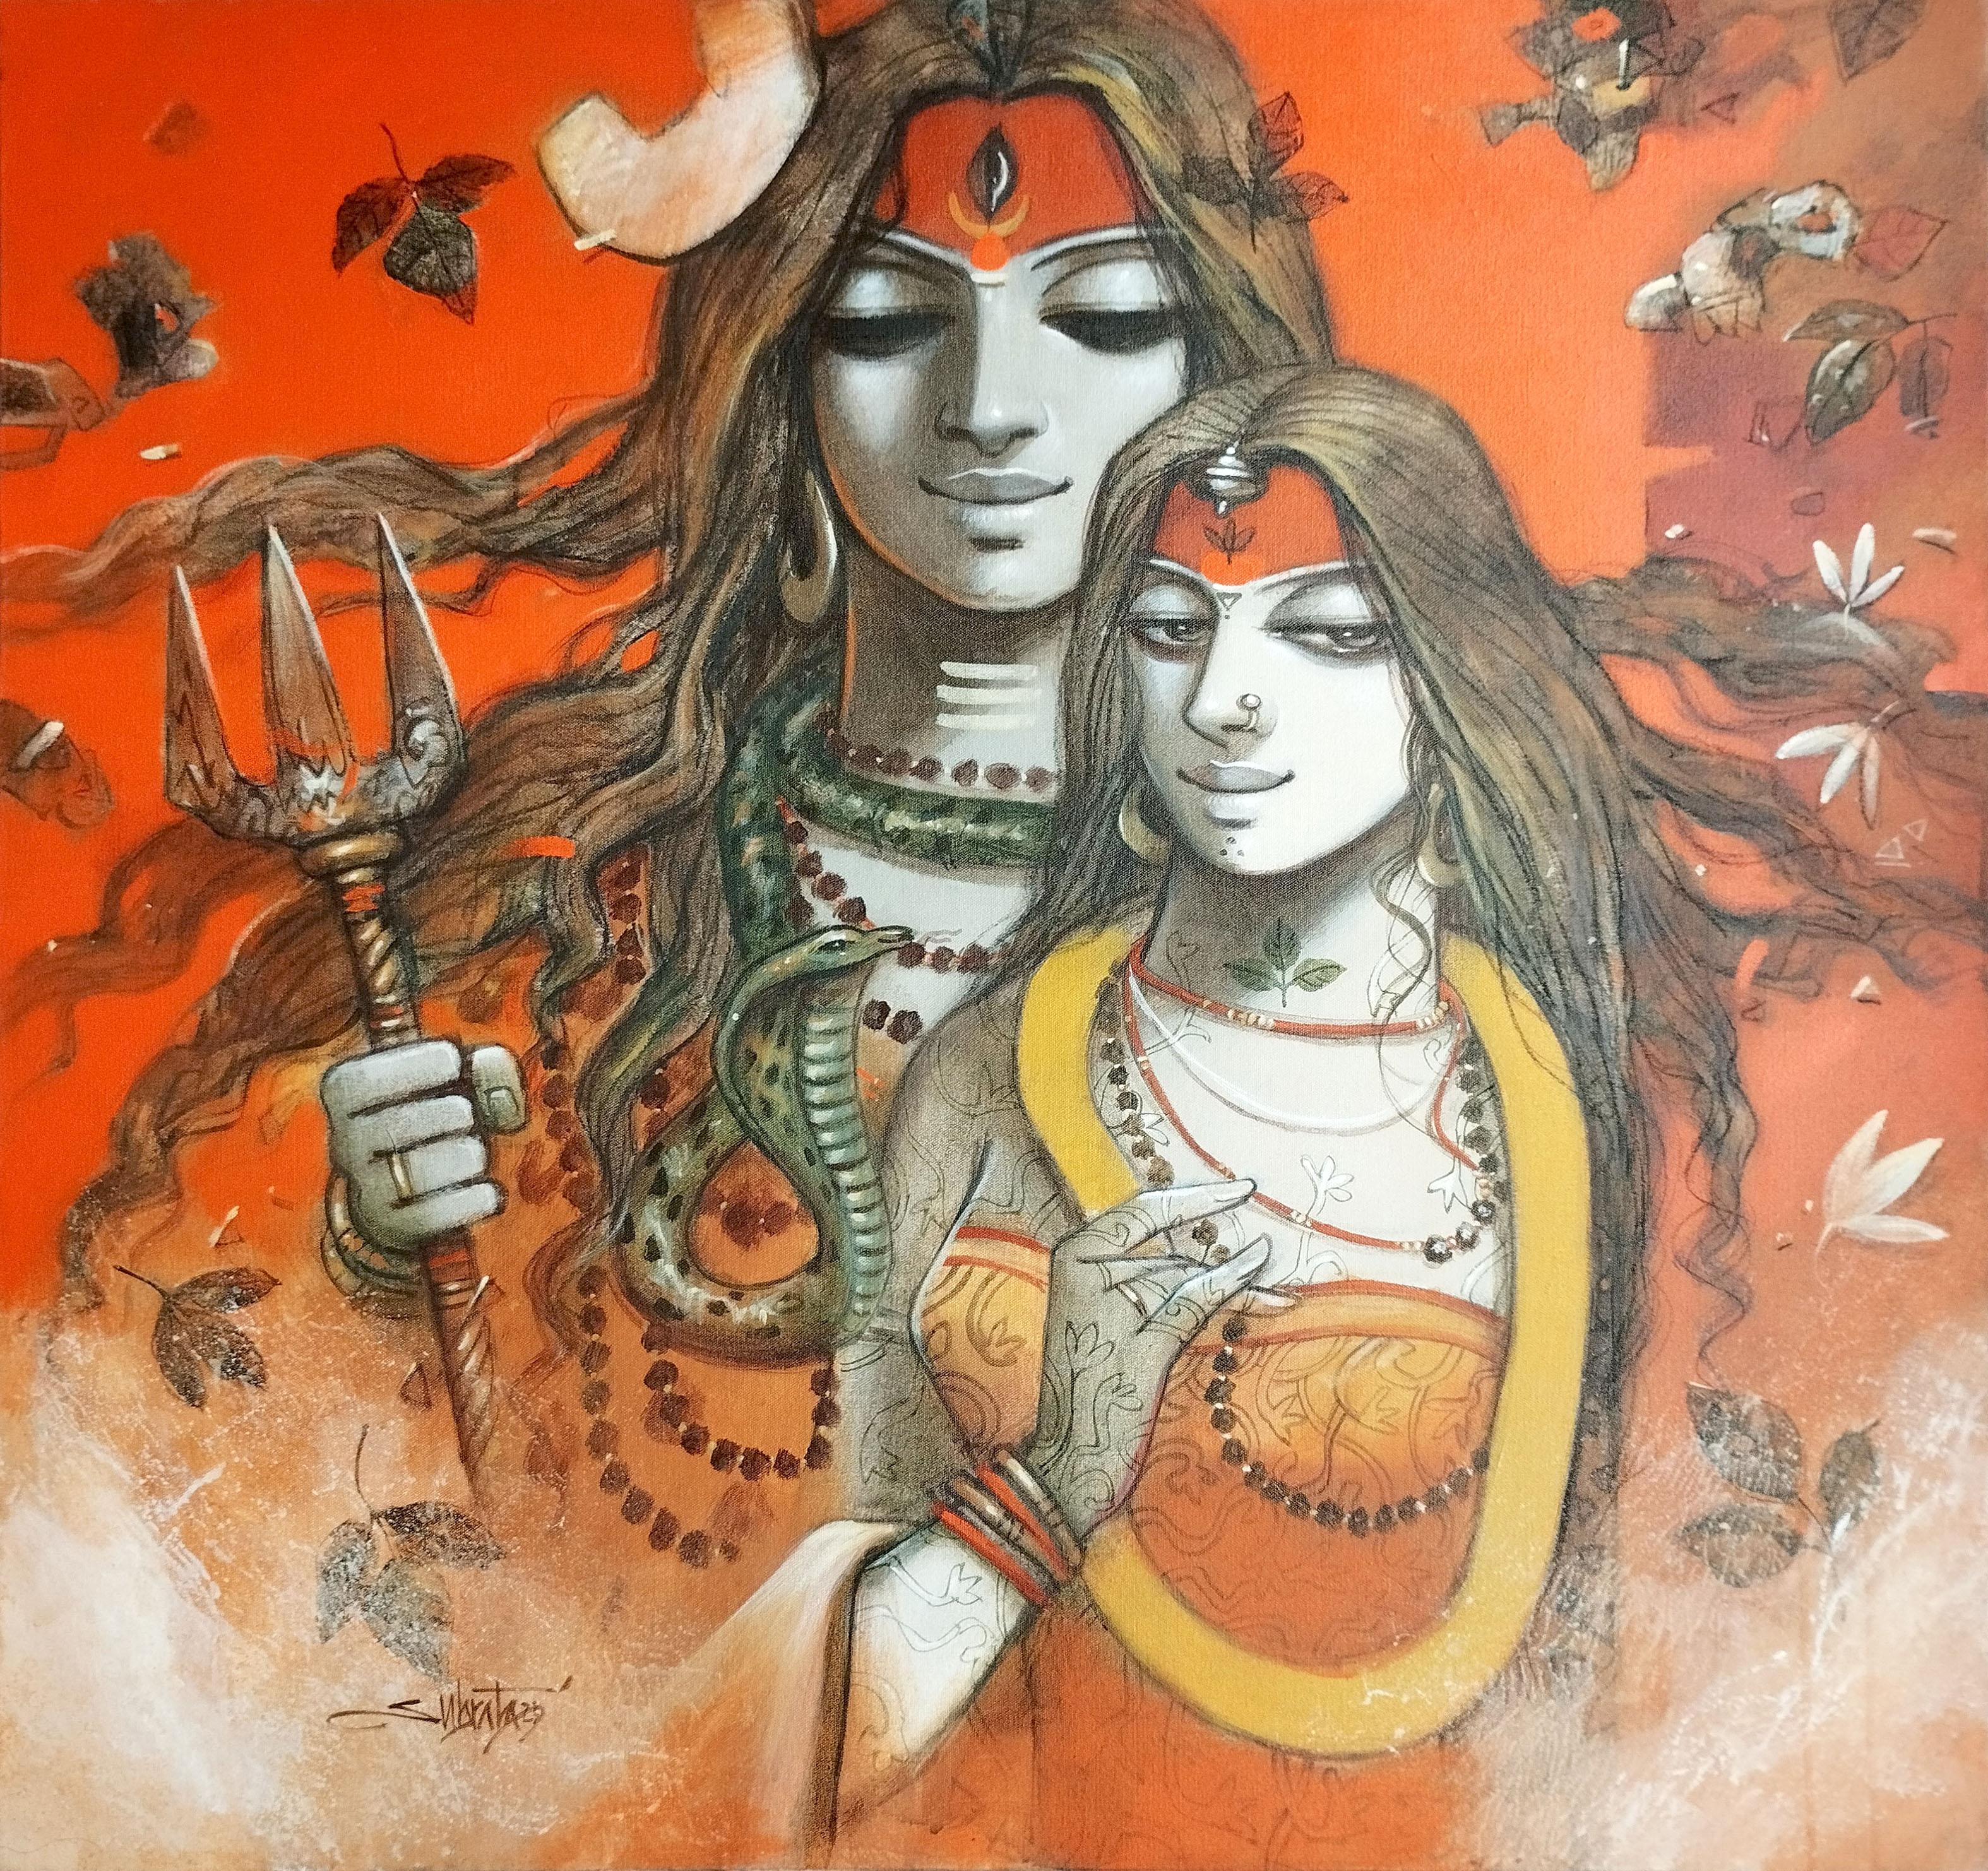 Subrata Das Portrait Painting - Shiva Parvati, Acrylic on Canvas by Contemporary, Red, Yellow, White "In Stock"